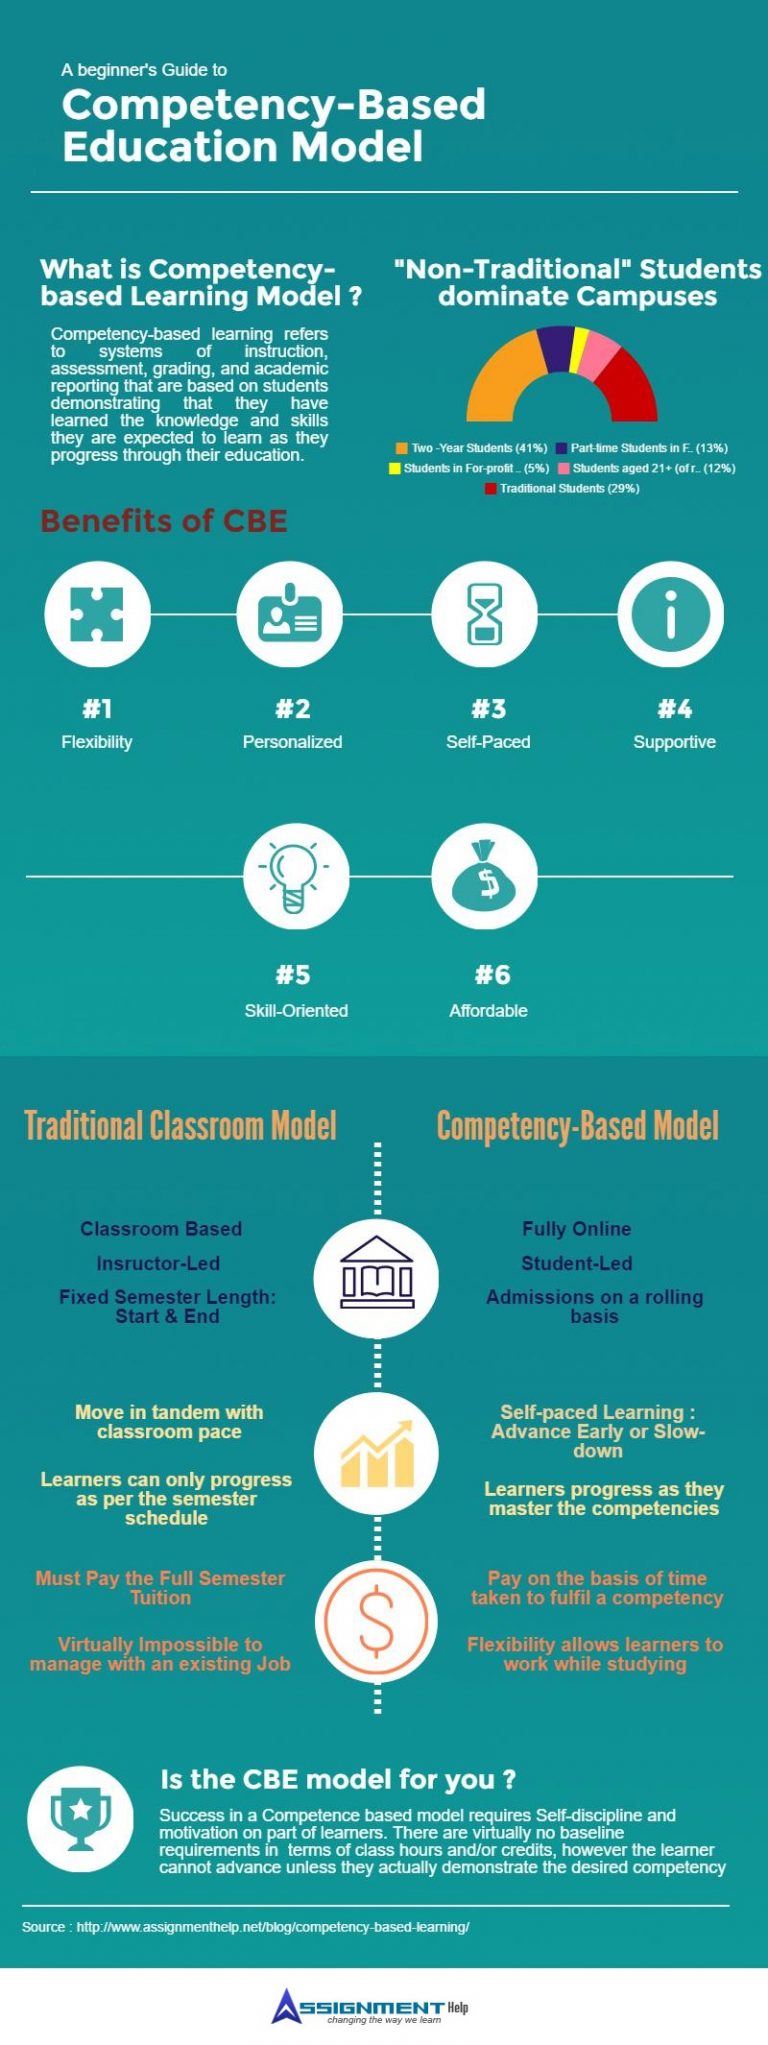 A Guide to CompetencyBased Education Model